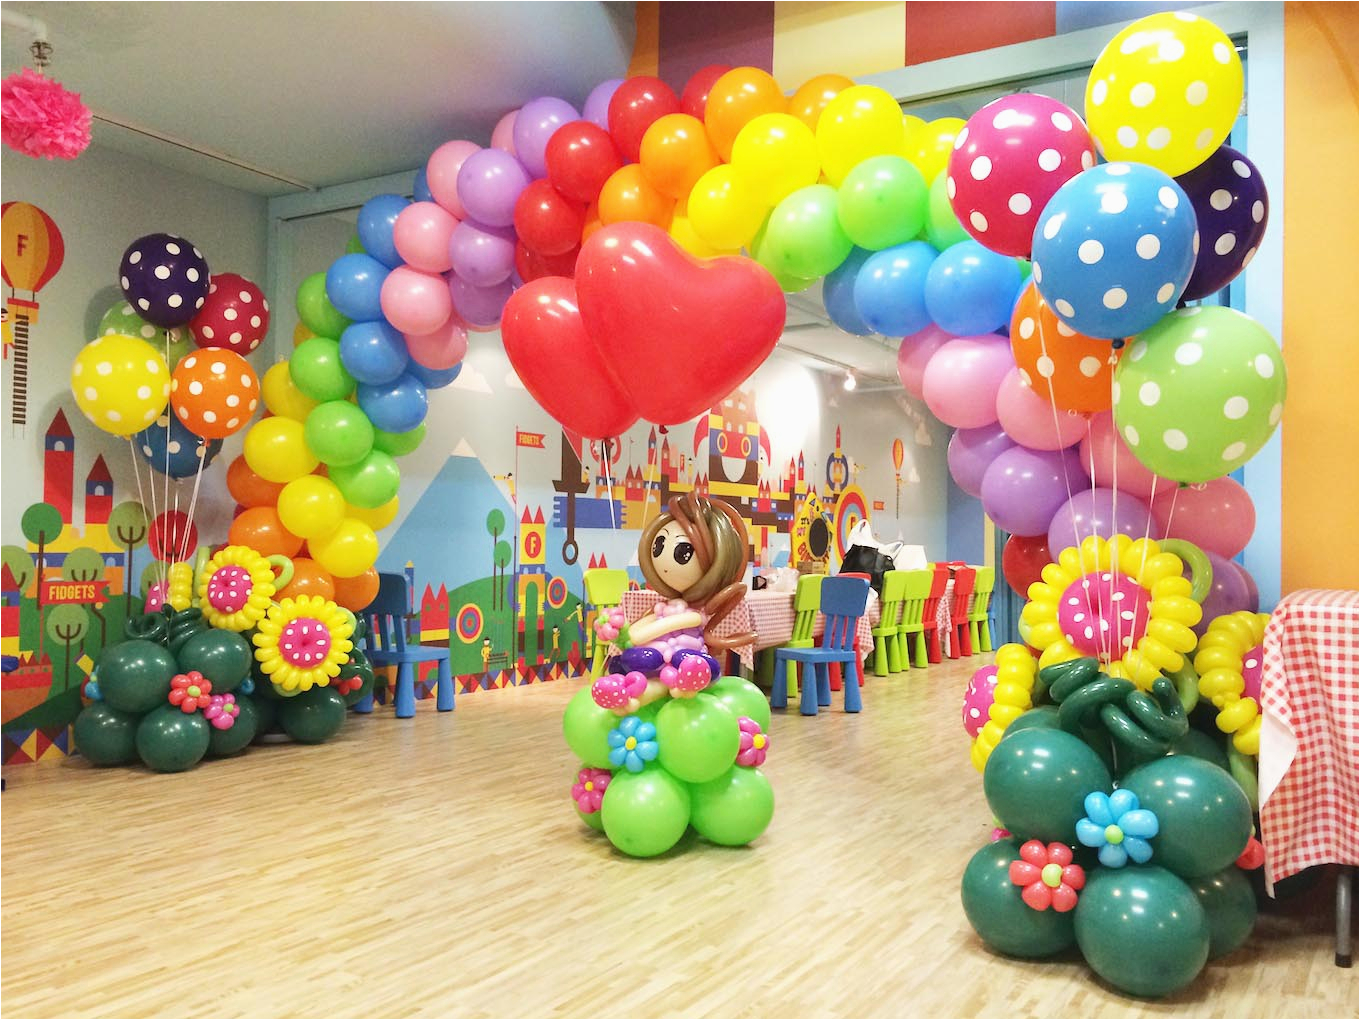 Decorative Balloons for A Birthday Party Cheapest Balloon Decorations for Birthday Party Party